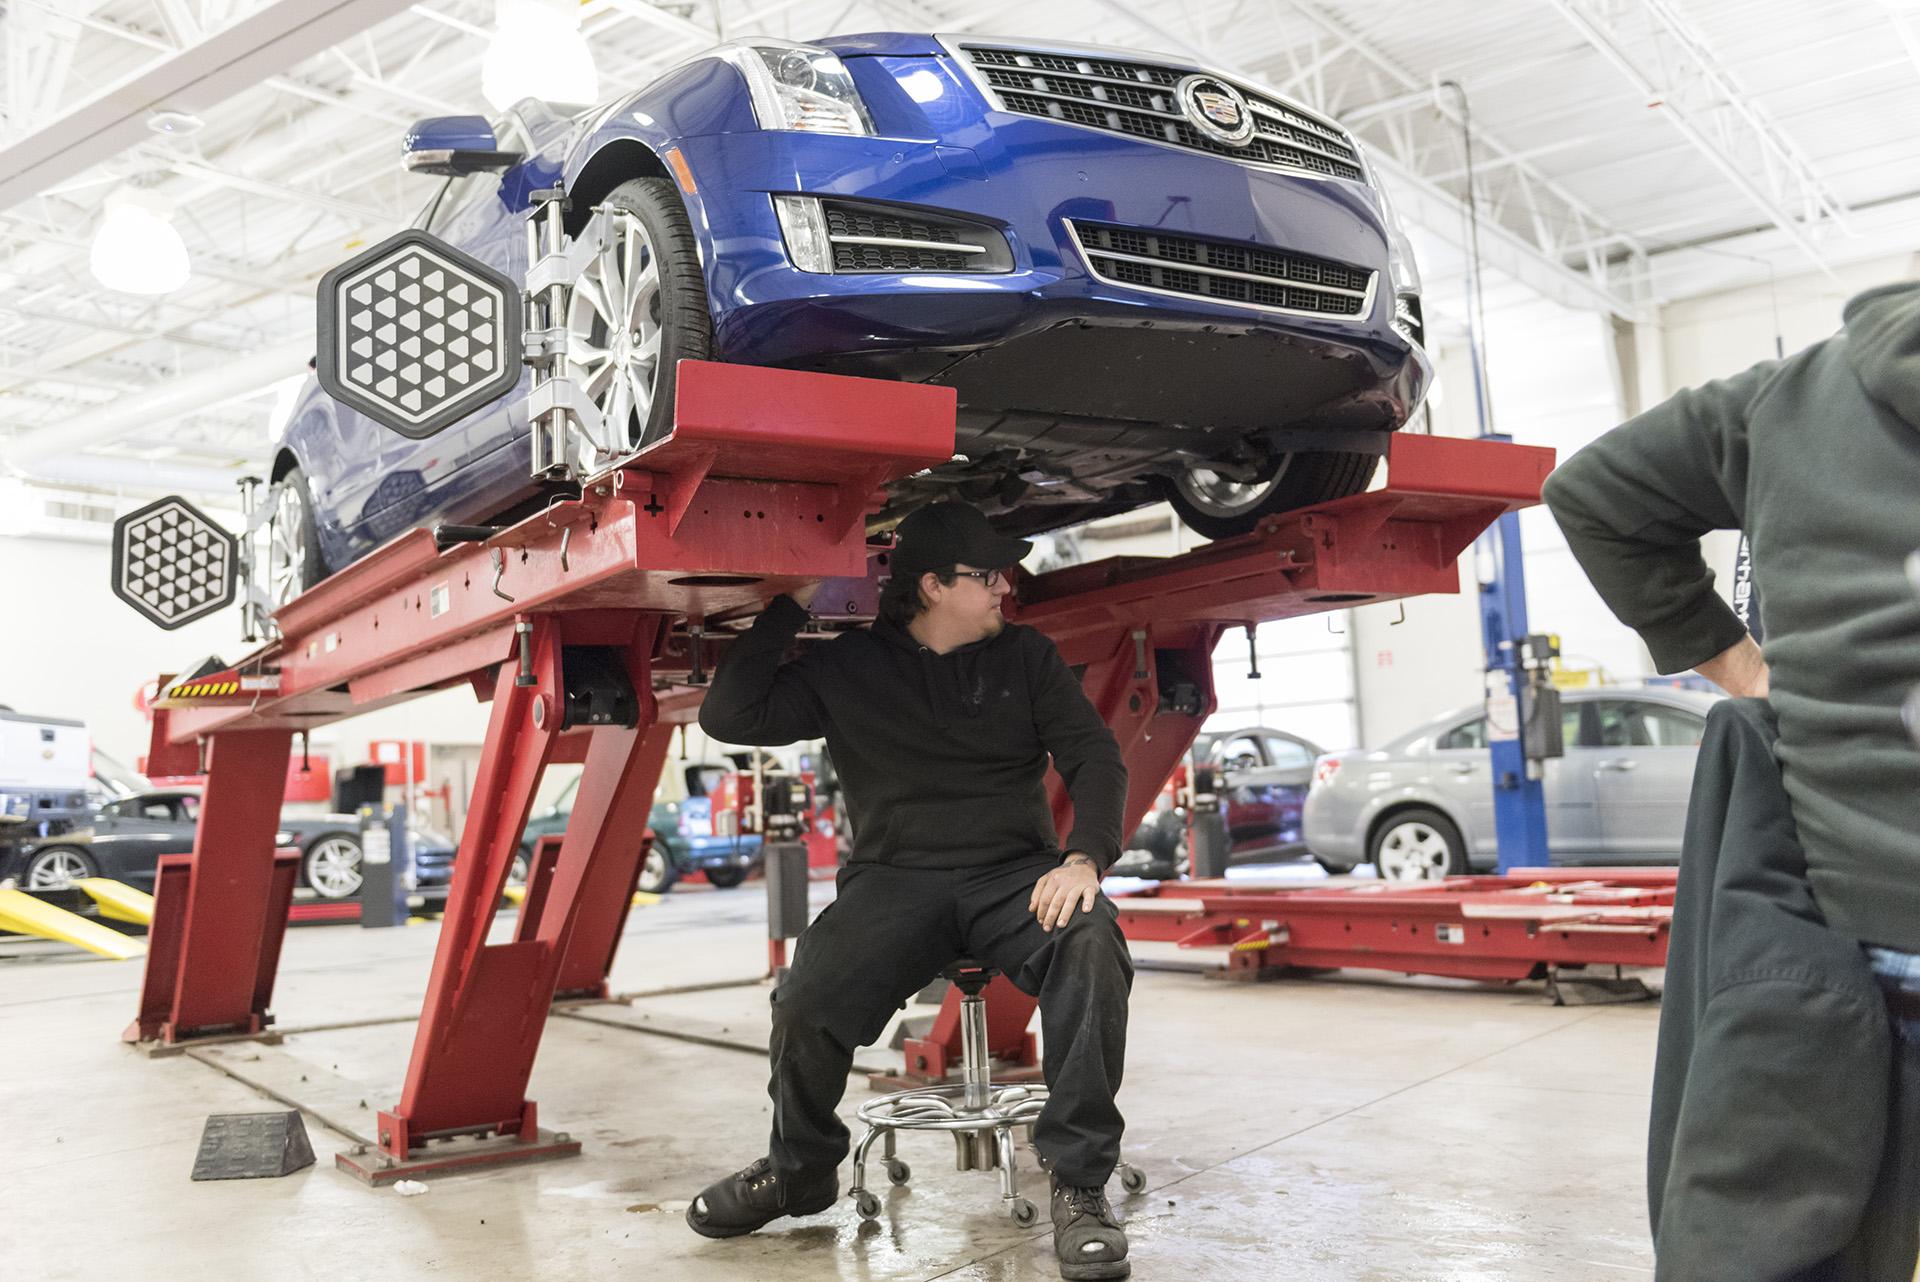 A student evaluates a car in the automotive lab.